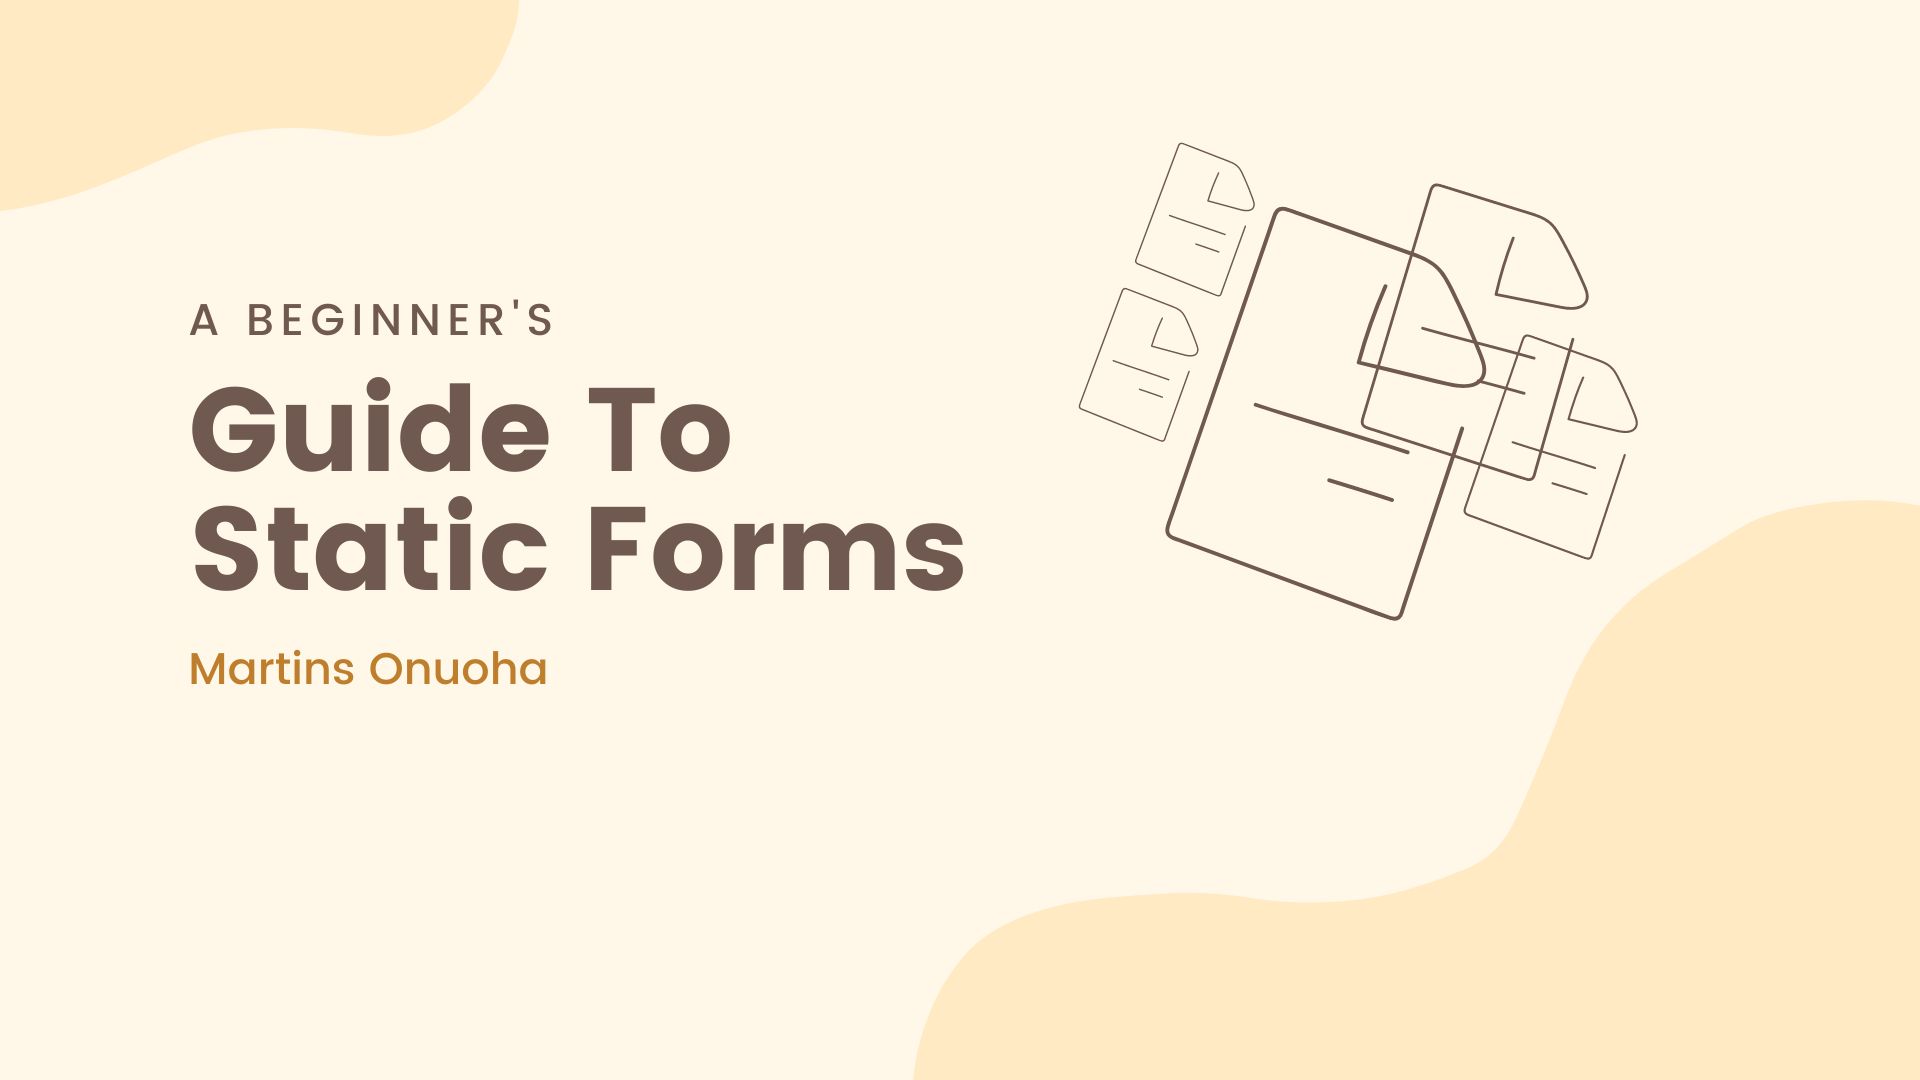 A Beginner's Guide to Static Forms